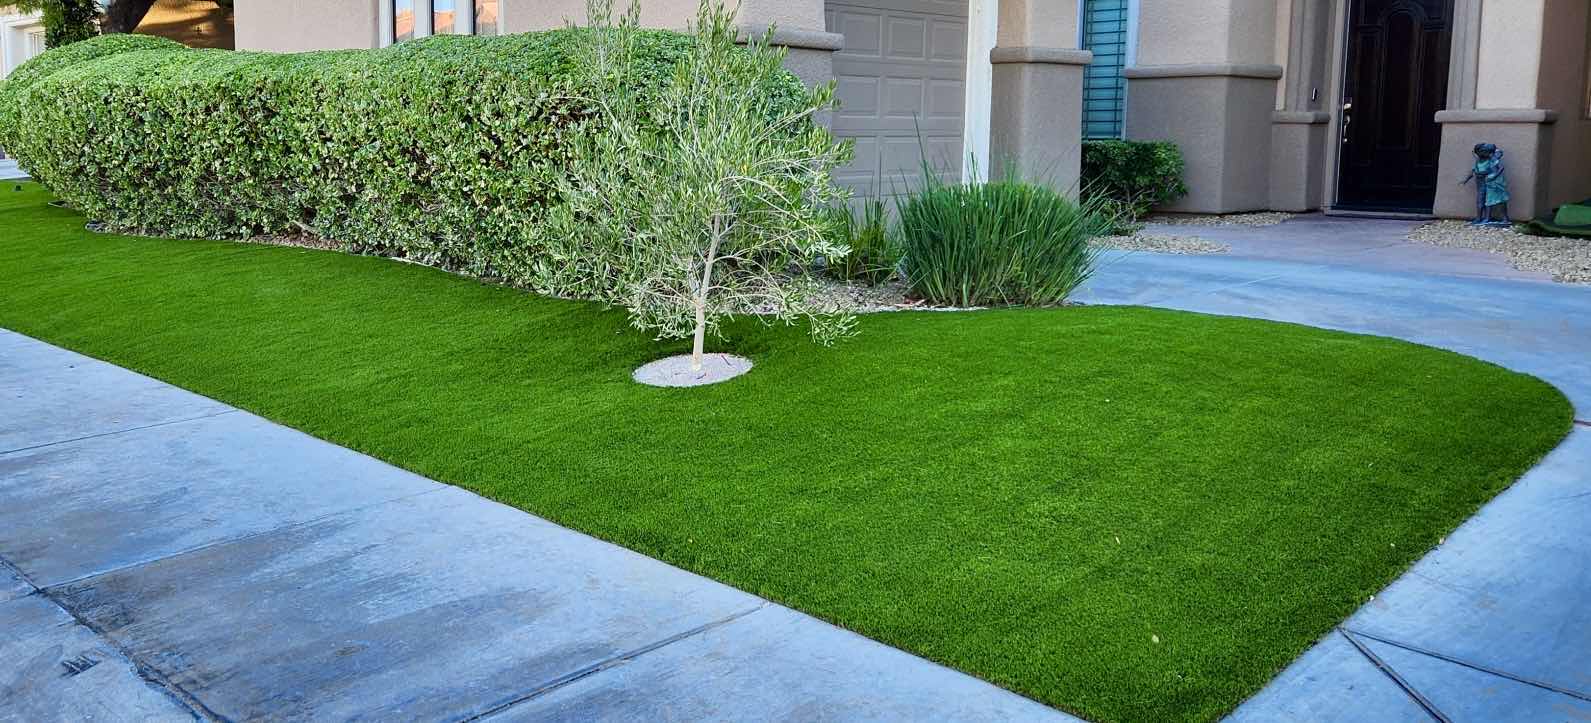 Photo 1 of SUPREME PREMIUM QUALITY ARTIFICIAL TURF GRASS 15’ X 100’ (1500 TOTAL SQ FT) ANTHEM COUNTRY CLUB APPROVED TOTAL TURF HEIGHT 1.97” (Pickup June Sun 2nd & Mon 3rd)